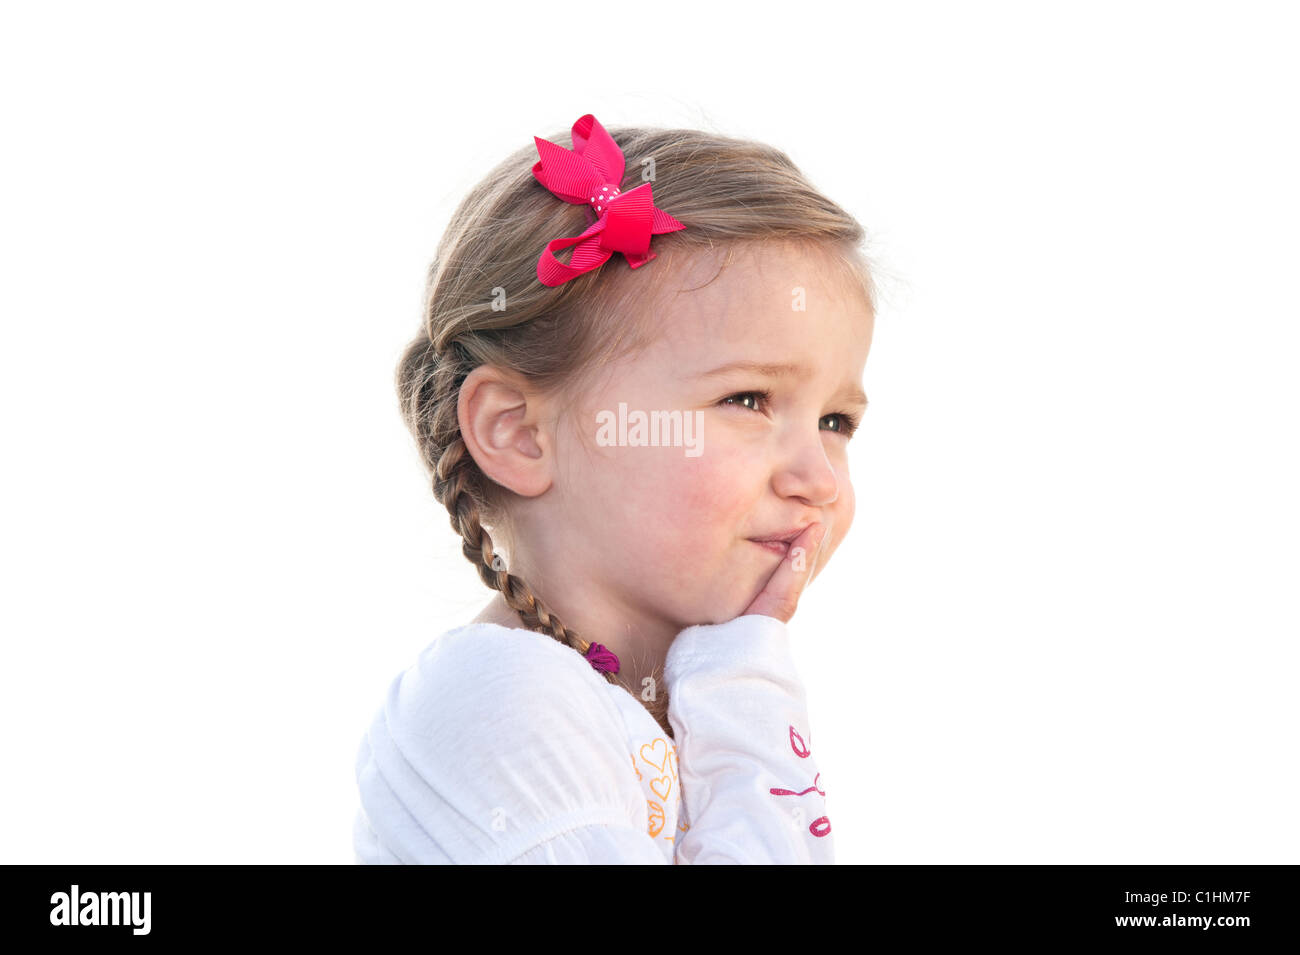 A little three year old girl on a white background thinking about something. Stock Photo